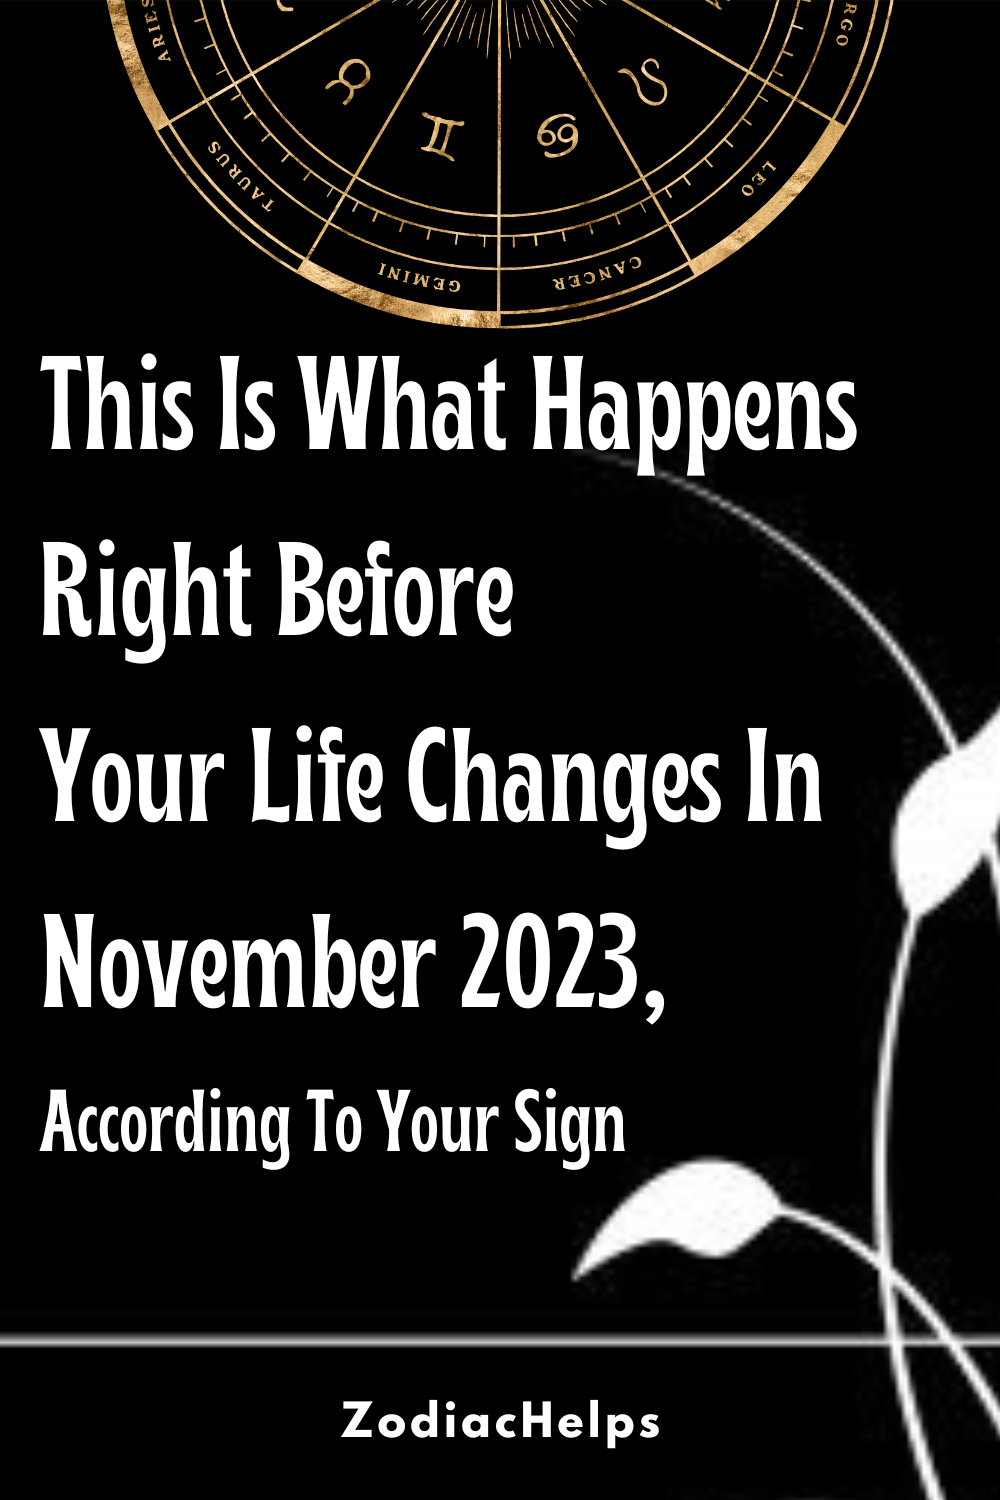 This Is What Happens Right Before Your Life Changes In November 2023, According To Your Sign